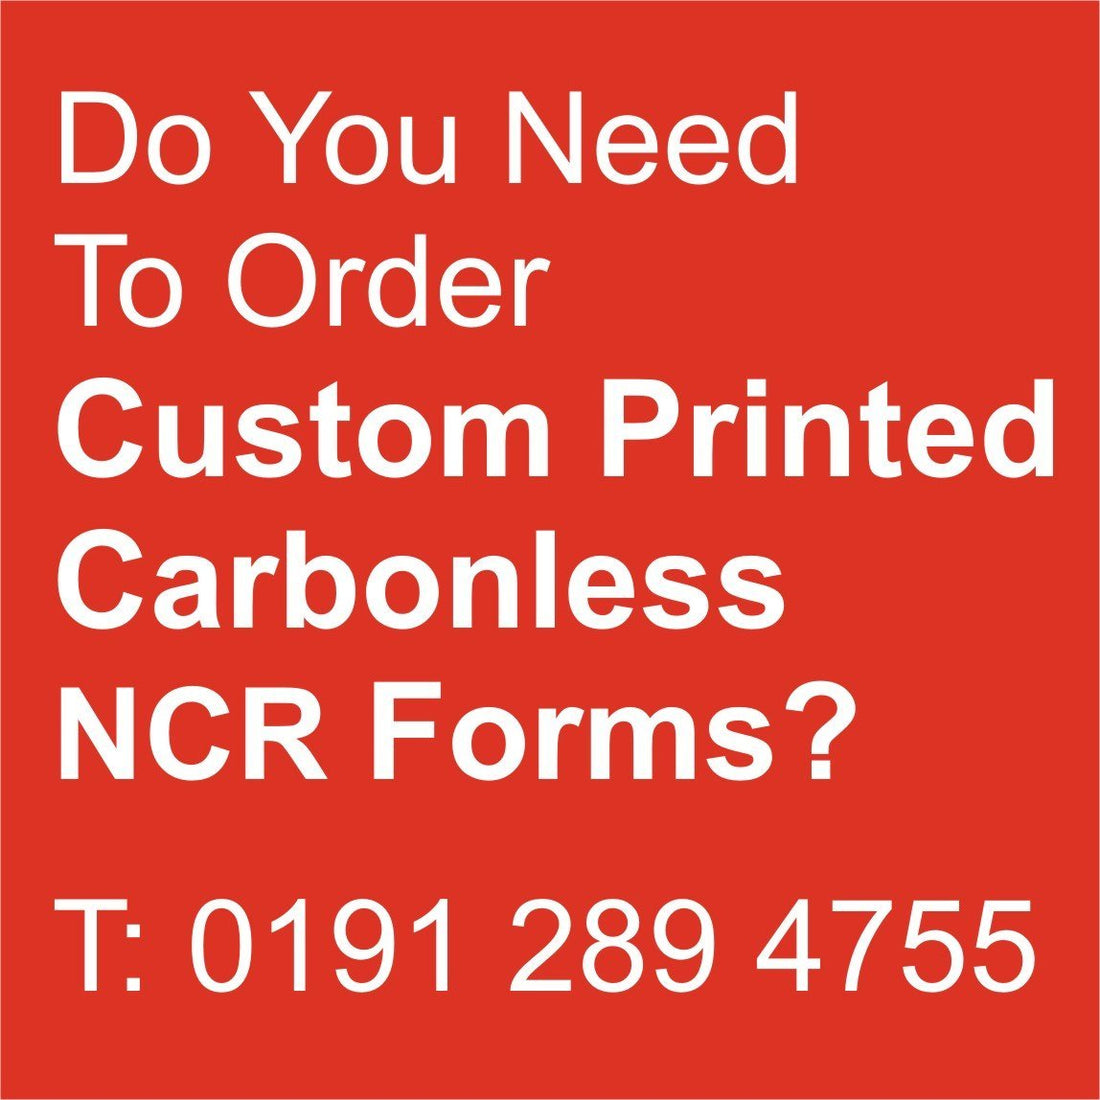 NCR Printing Special Offer - Spend £99.00+ & Get £20.20 OFF!